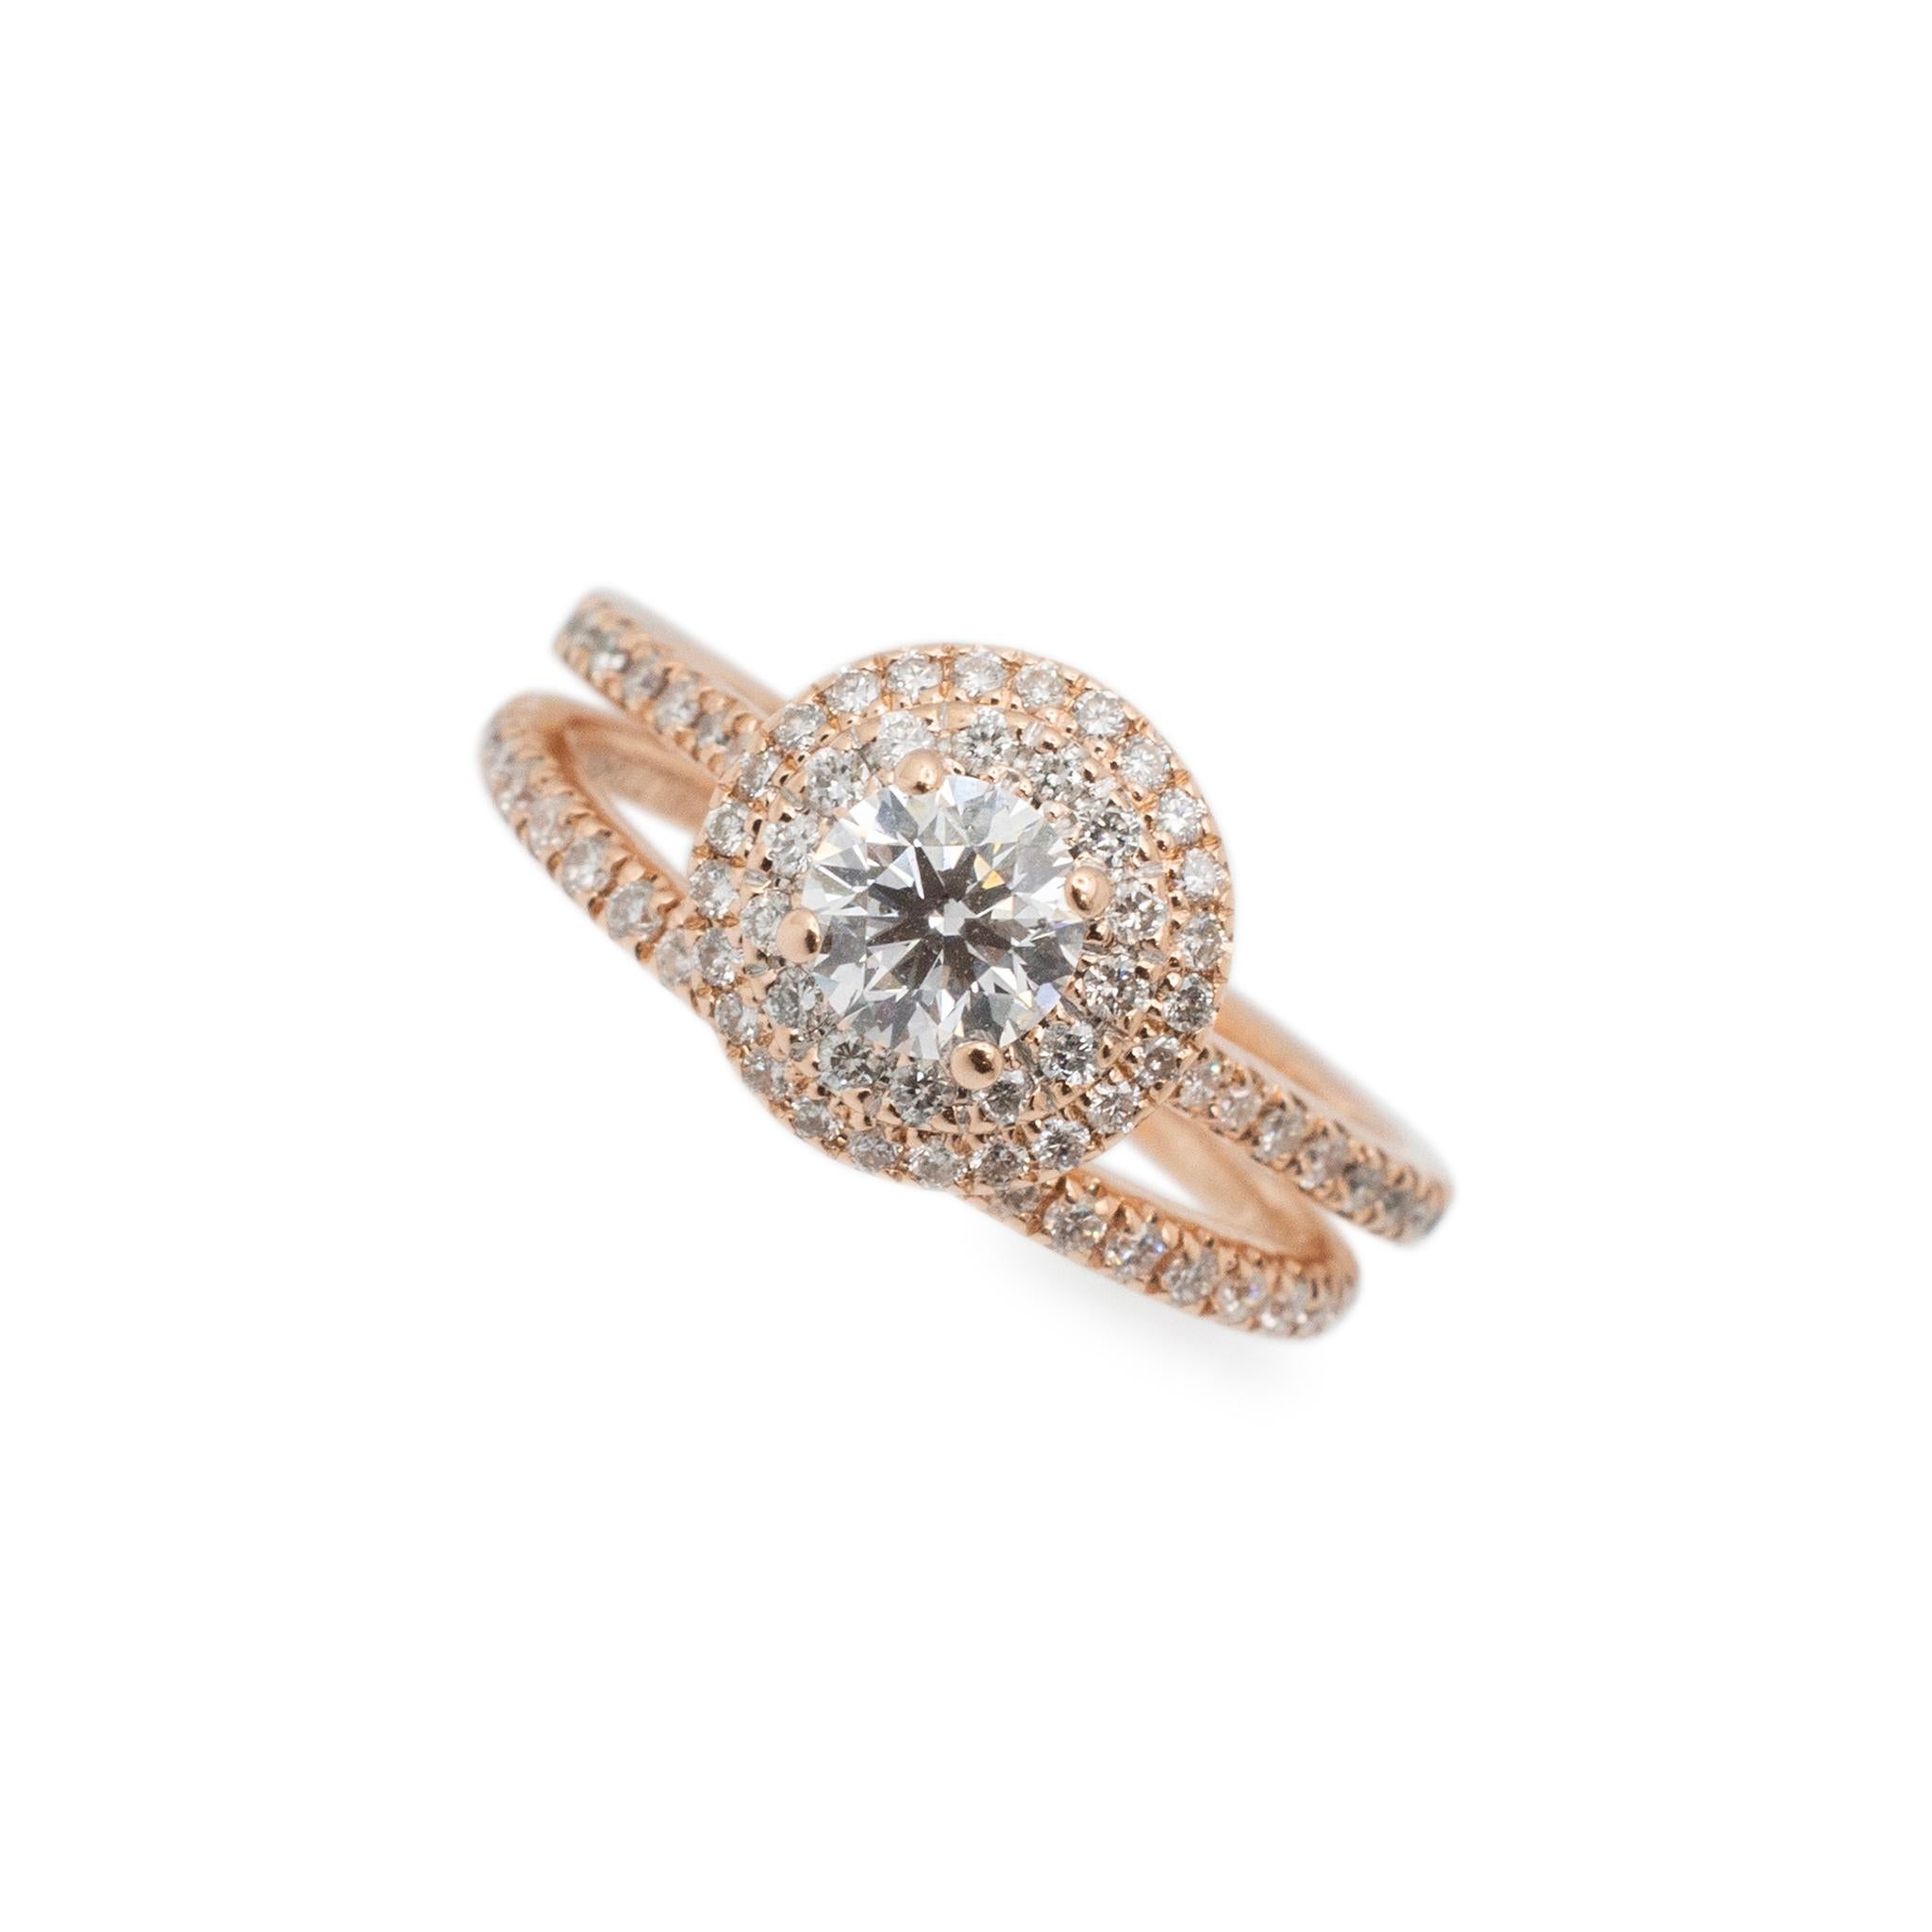 Gender: Ladies

Metal Type: 14K Rose Gold

Size: 4

Diameter: 9.50 mm

Ring Width: 1.50 mm

Band Width: 1.60 mm

Ring Weight: 2.79 grams

Band Weight: 1.43 grams

One ladies 14K rose gold diamond engagement, double-halo ring with a half round shank.